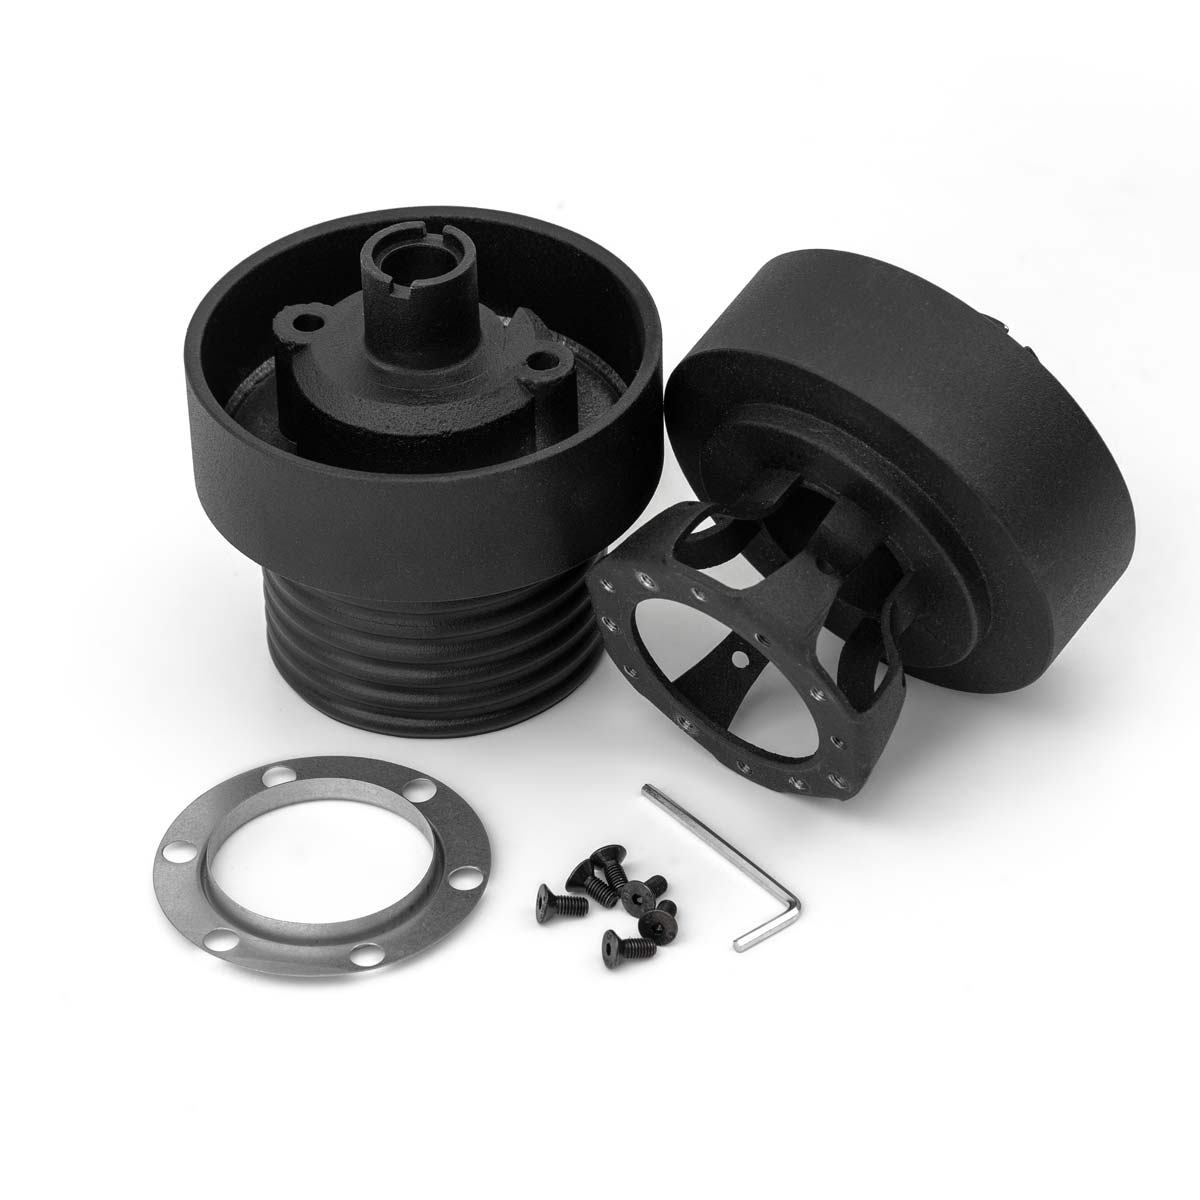 LUISI steering wheel hub Volvo 740 up to 1991 (TÜV-compliant deformable / 6x74mm 6x70mm)